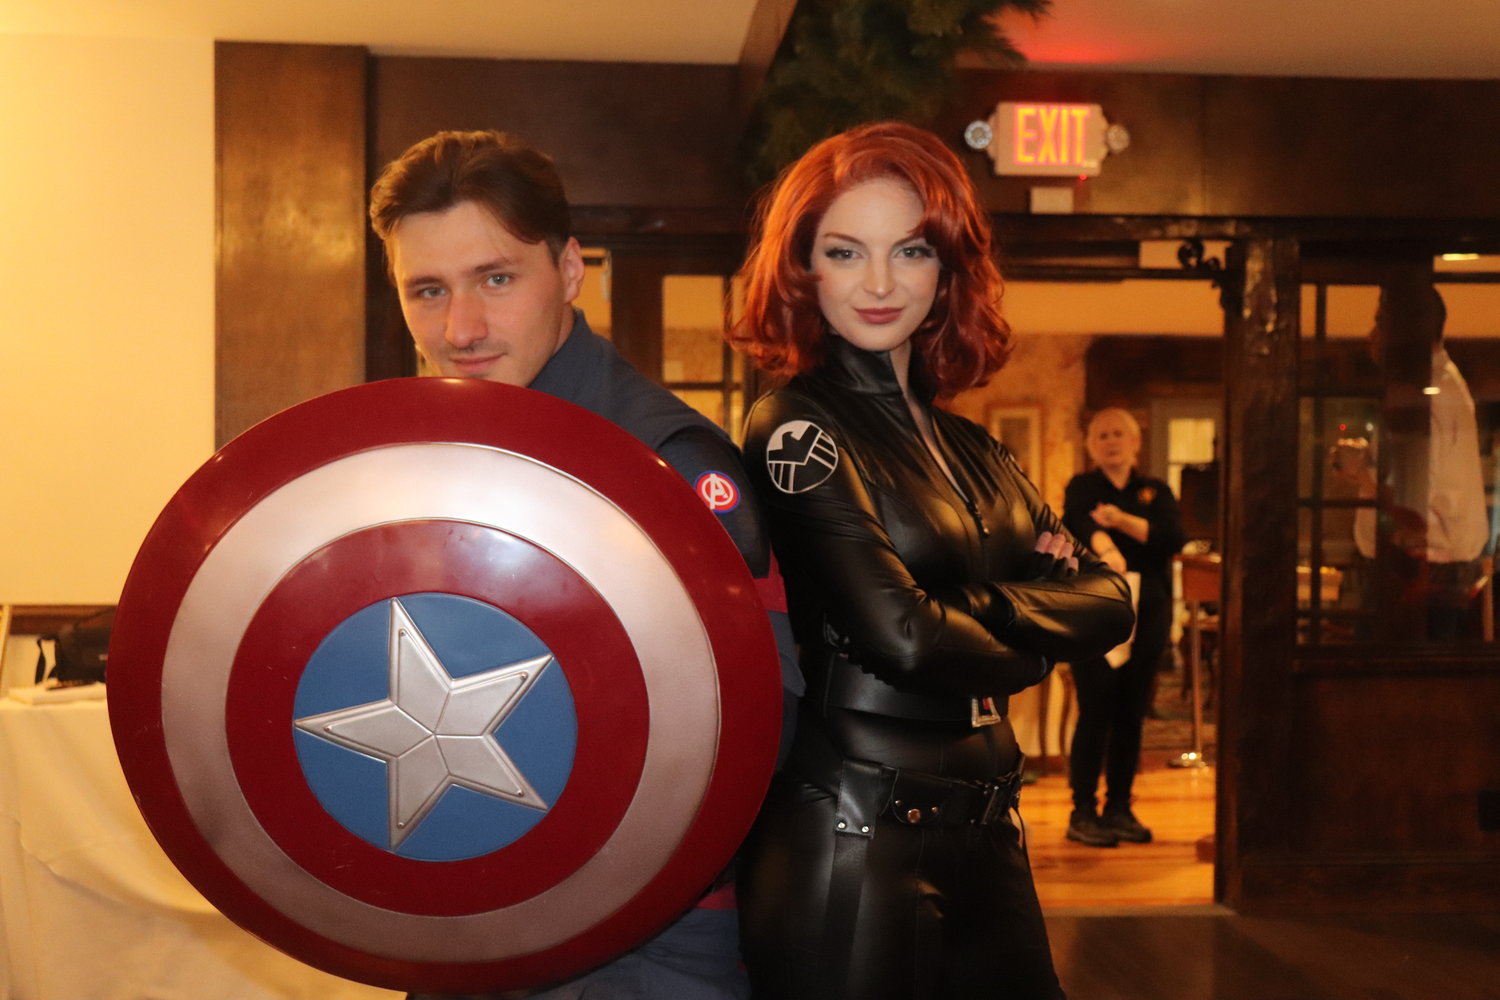 Captain America and Black Widow made an appearance at the Milleridge Inn.